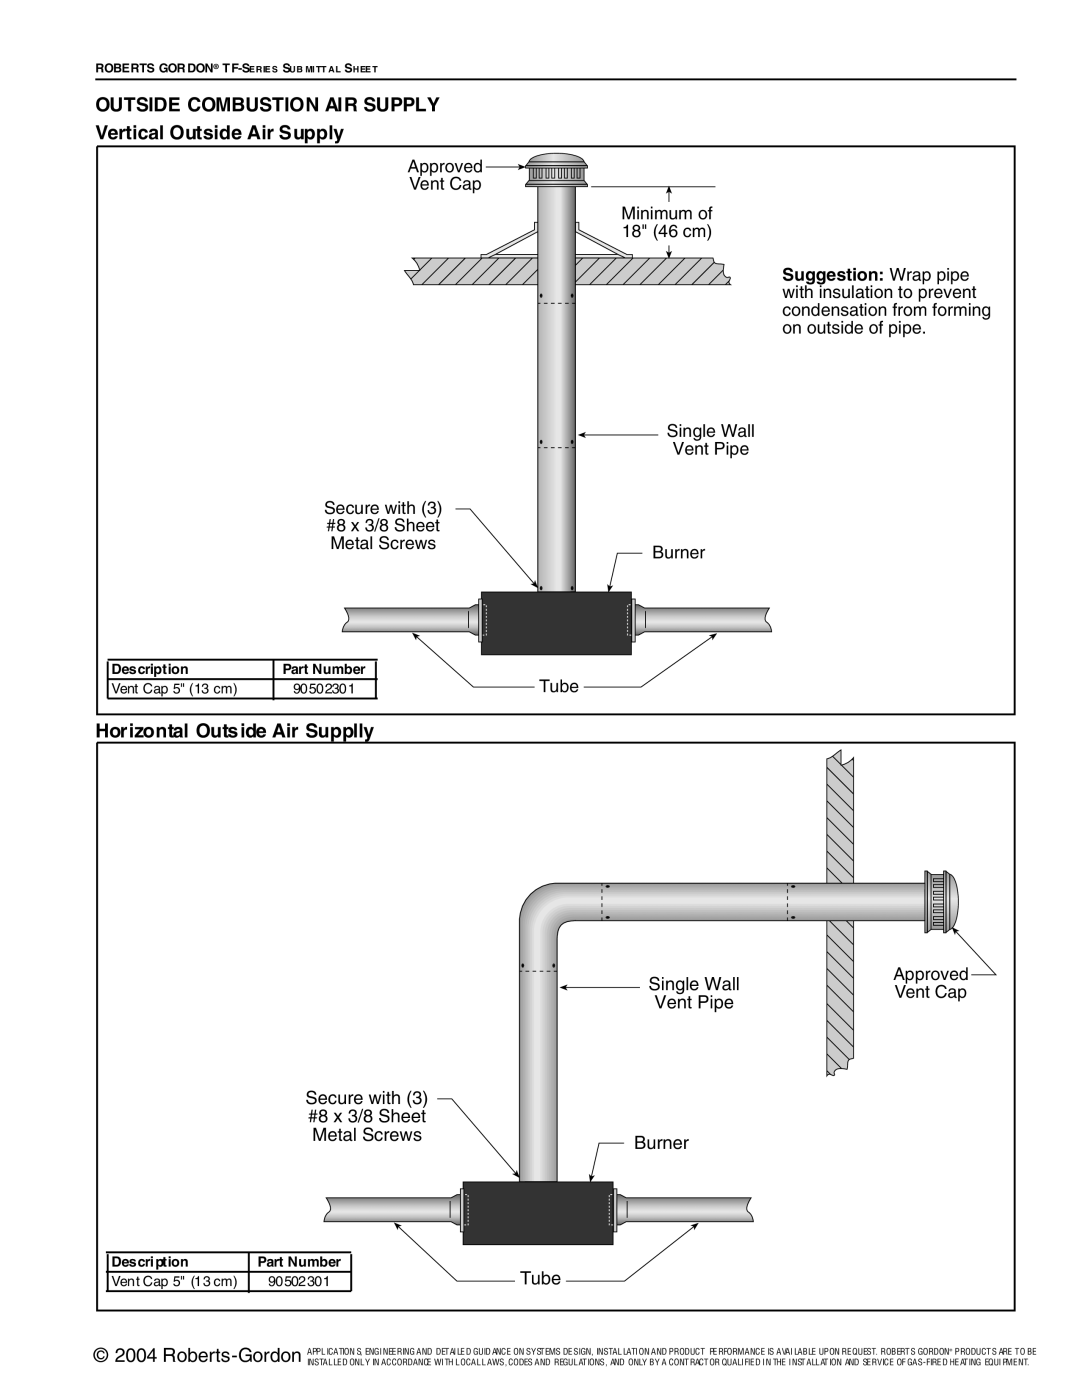 Roberts Gorden TF-Series Outside Combustion Air Supply, Vertical Outside Air Supply, Horizontal Outside Air Supplly, Tube 